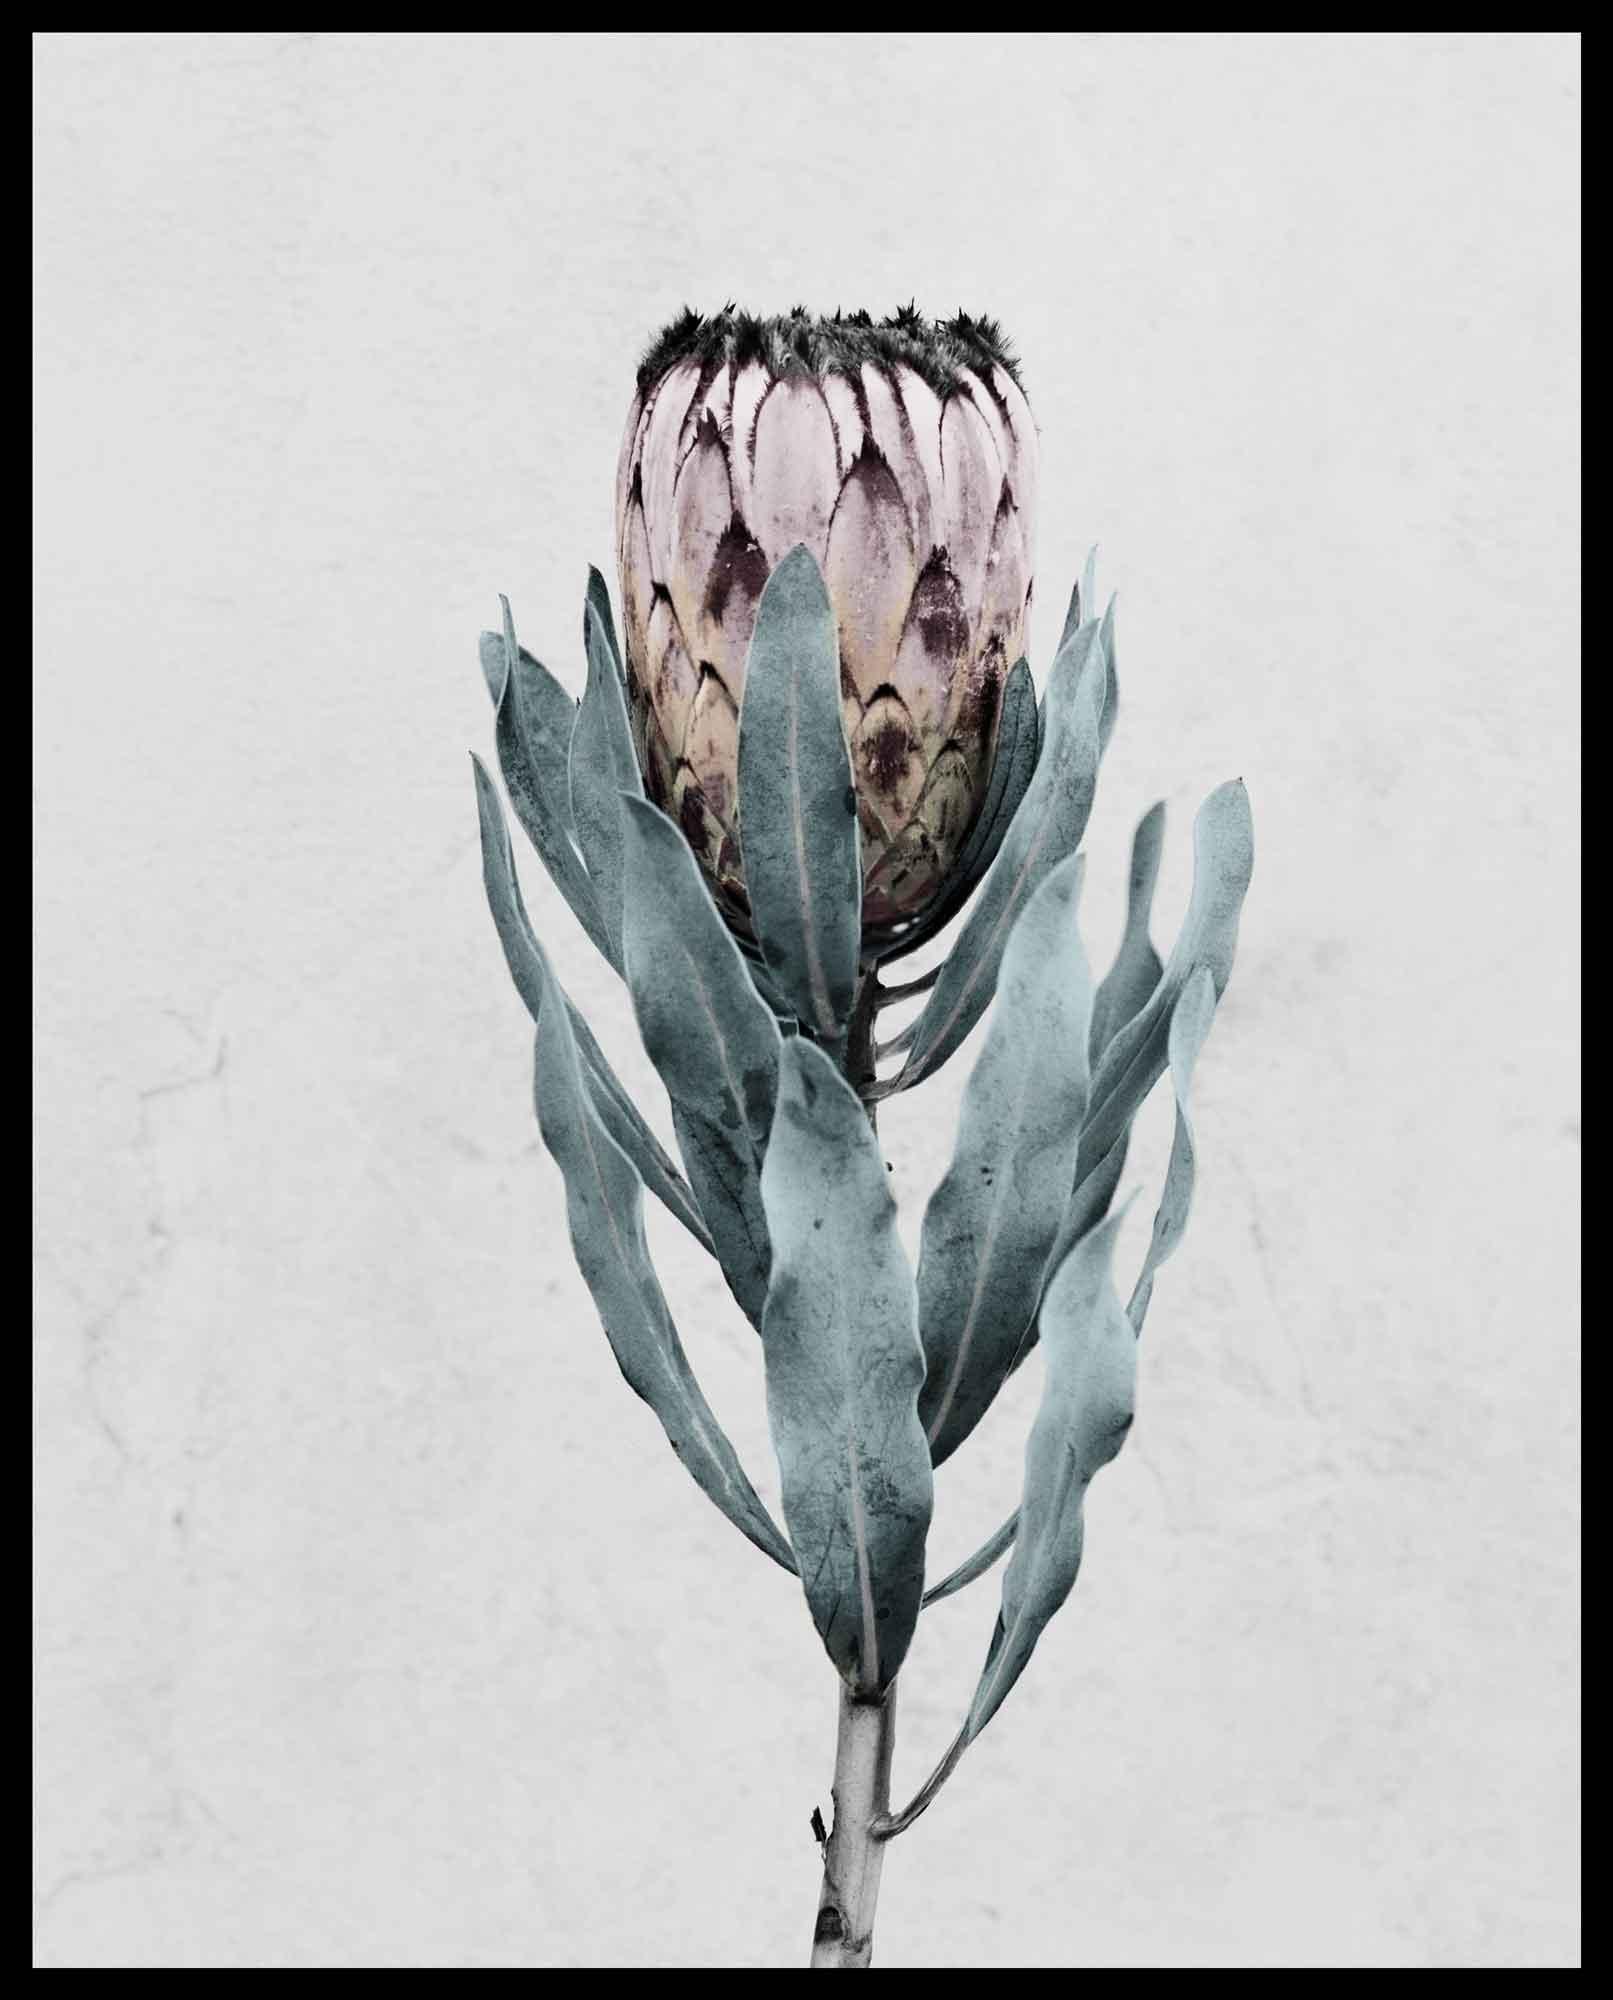 Botanica #17 (Protea Cynaroides) - Gray Color Photograph by Vee Speers